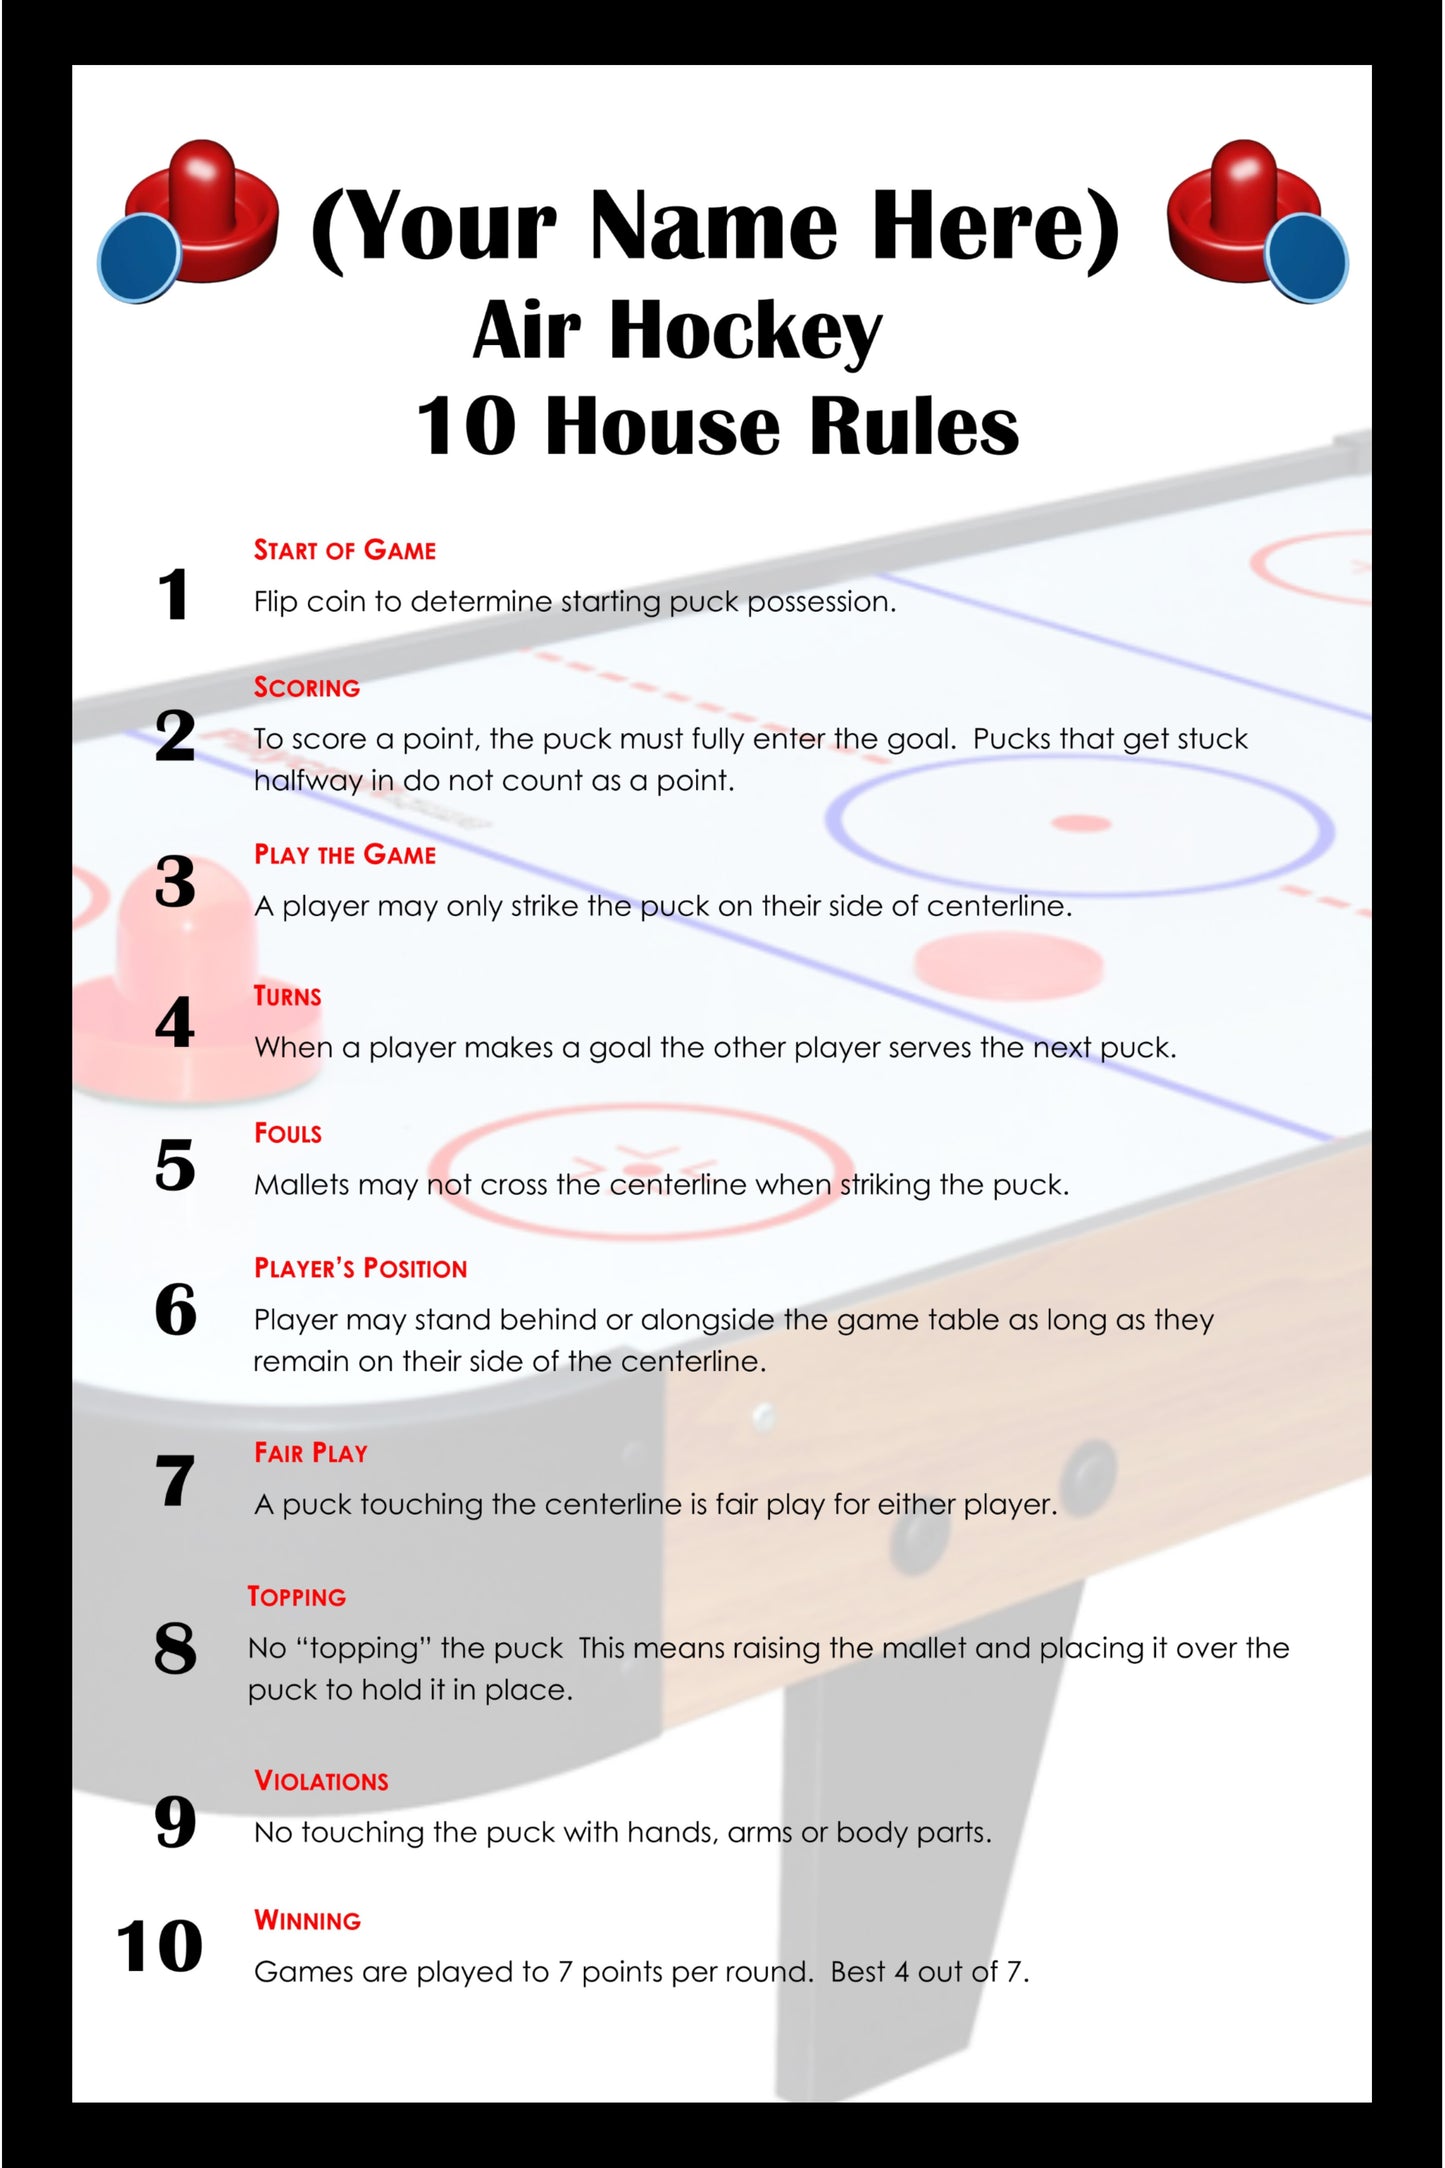 10 Personalized House Rules for Air Hockey